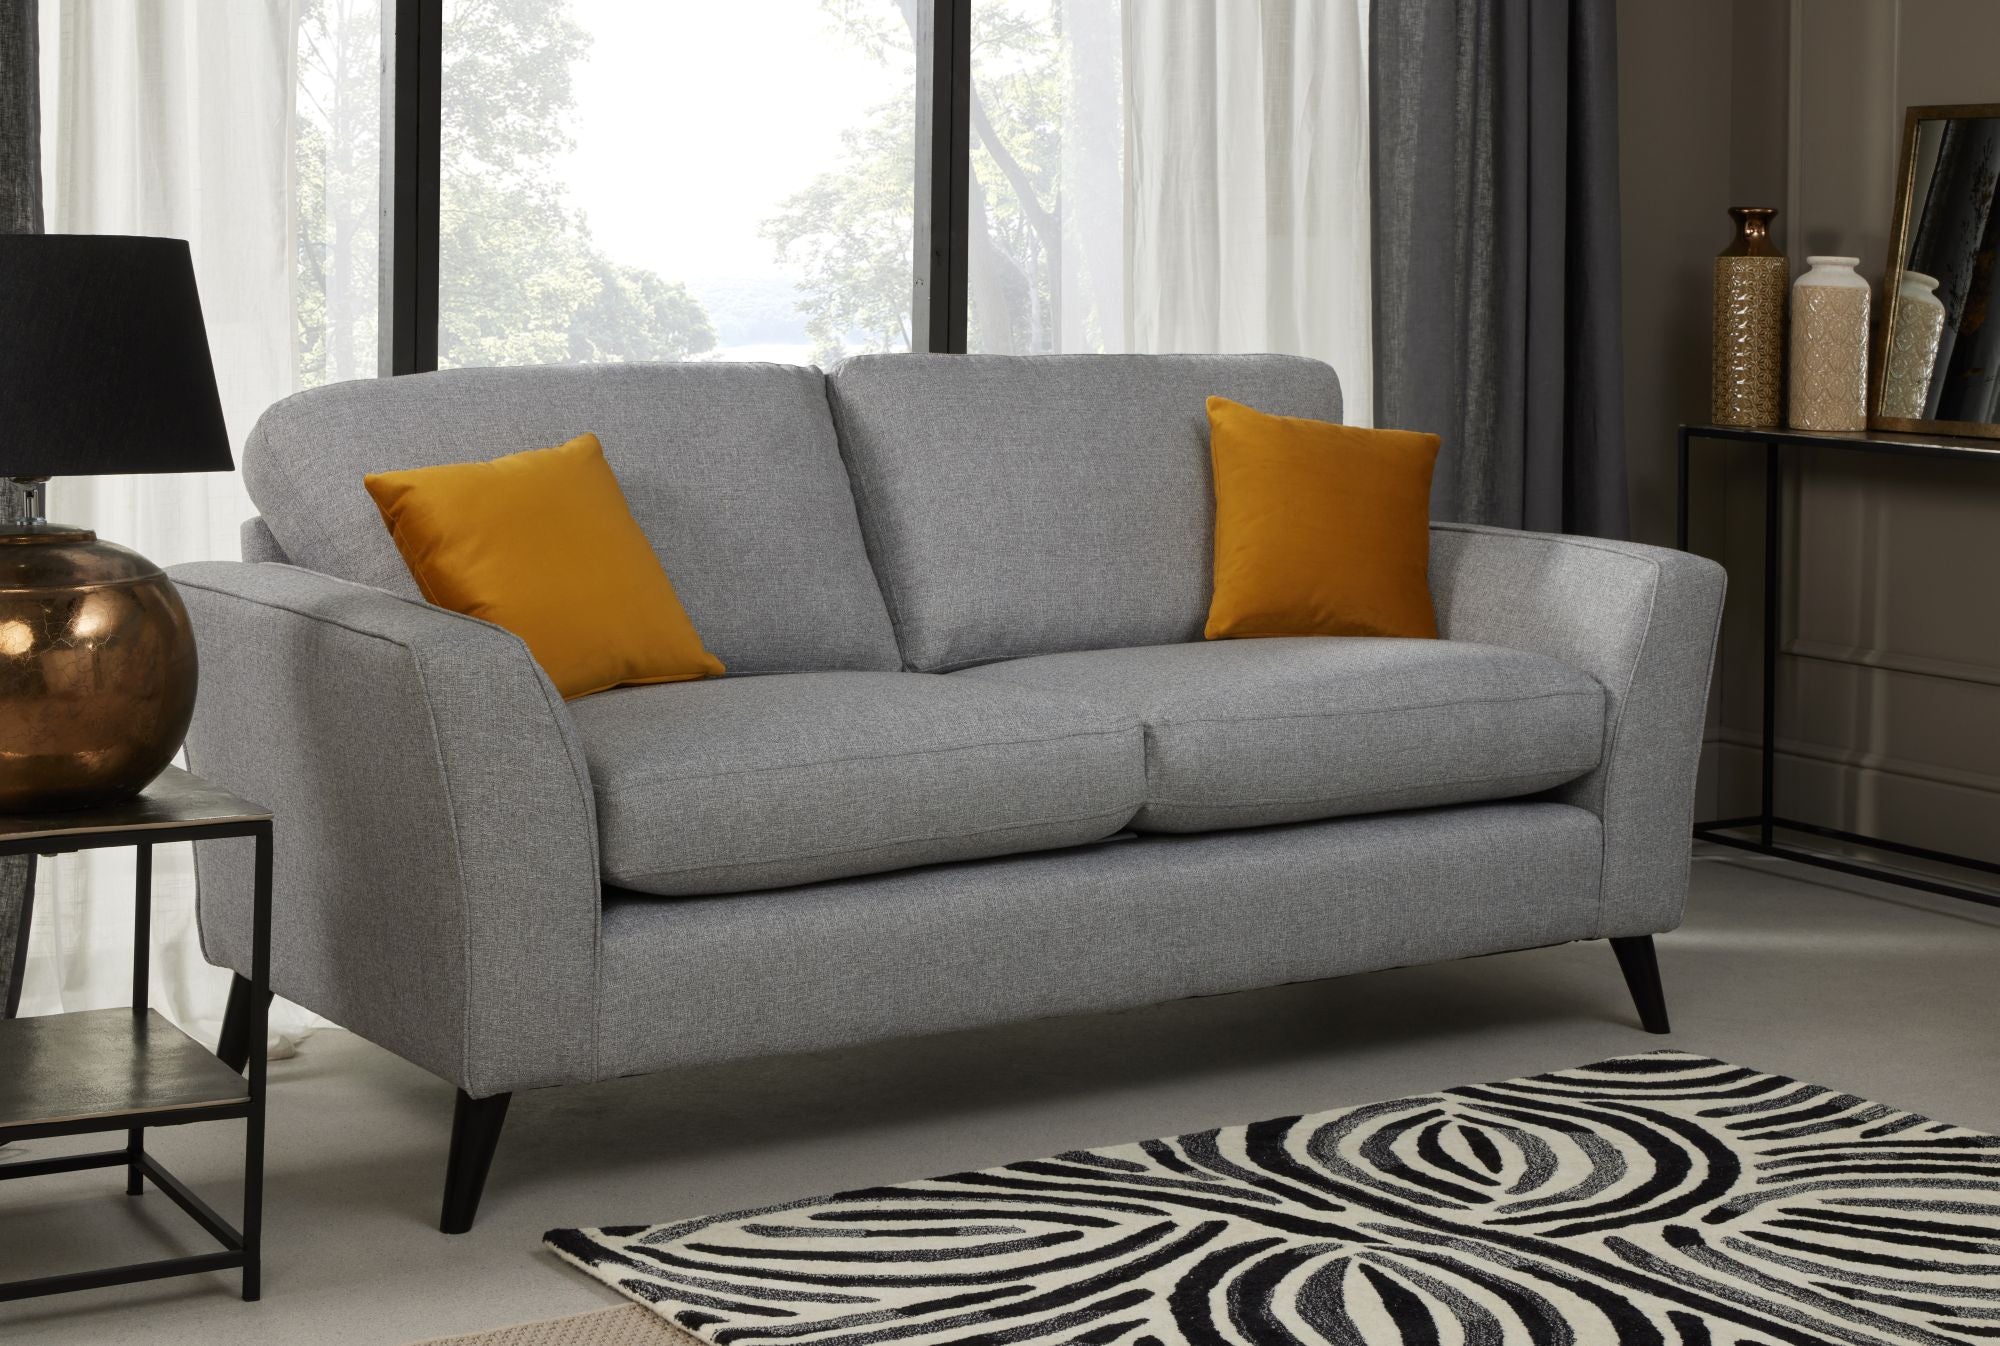 Libby 3 seater in silver shown in a room setting